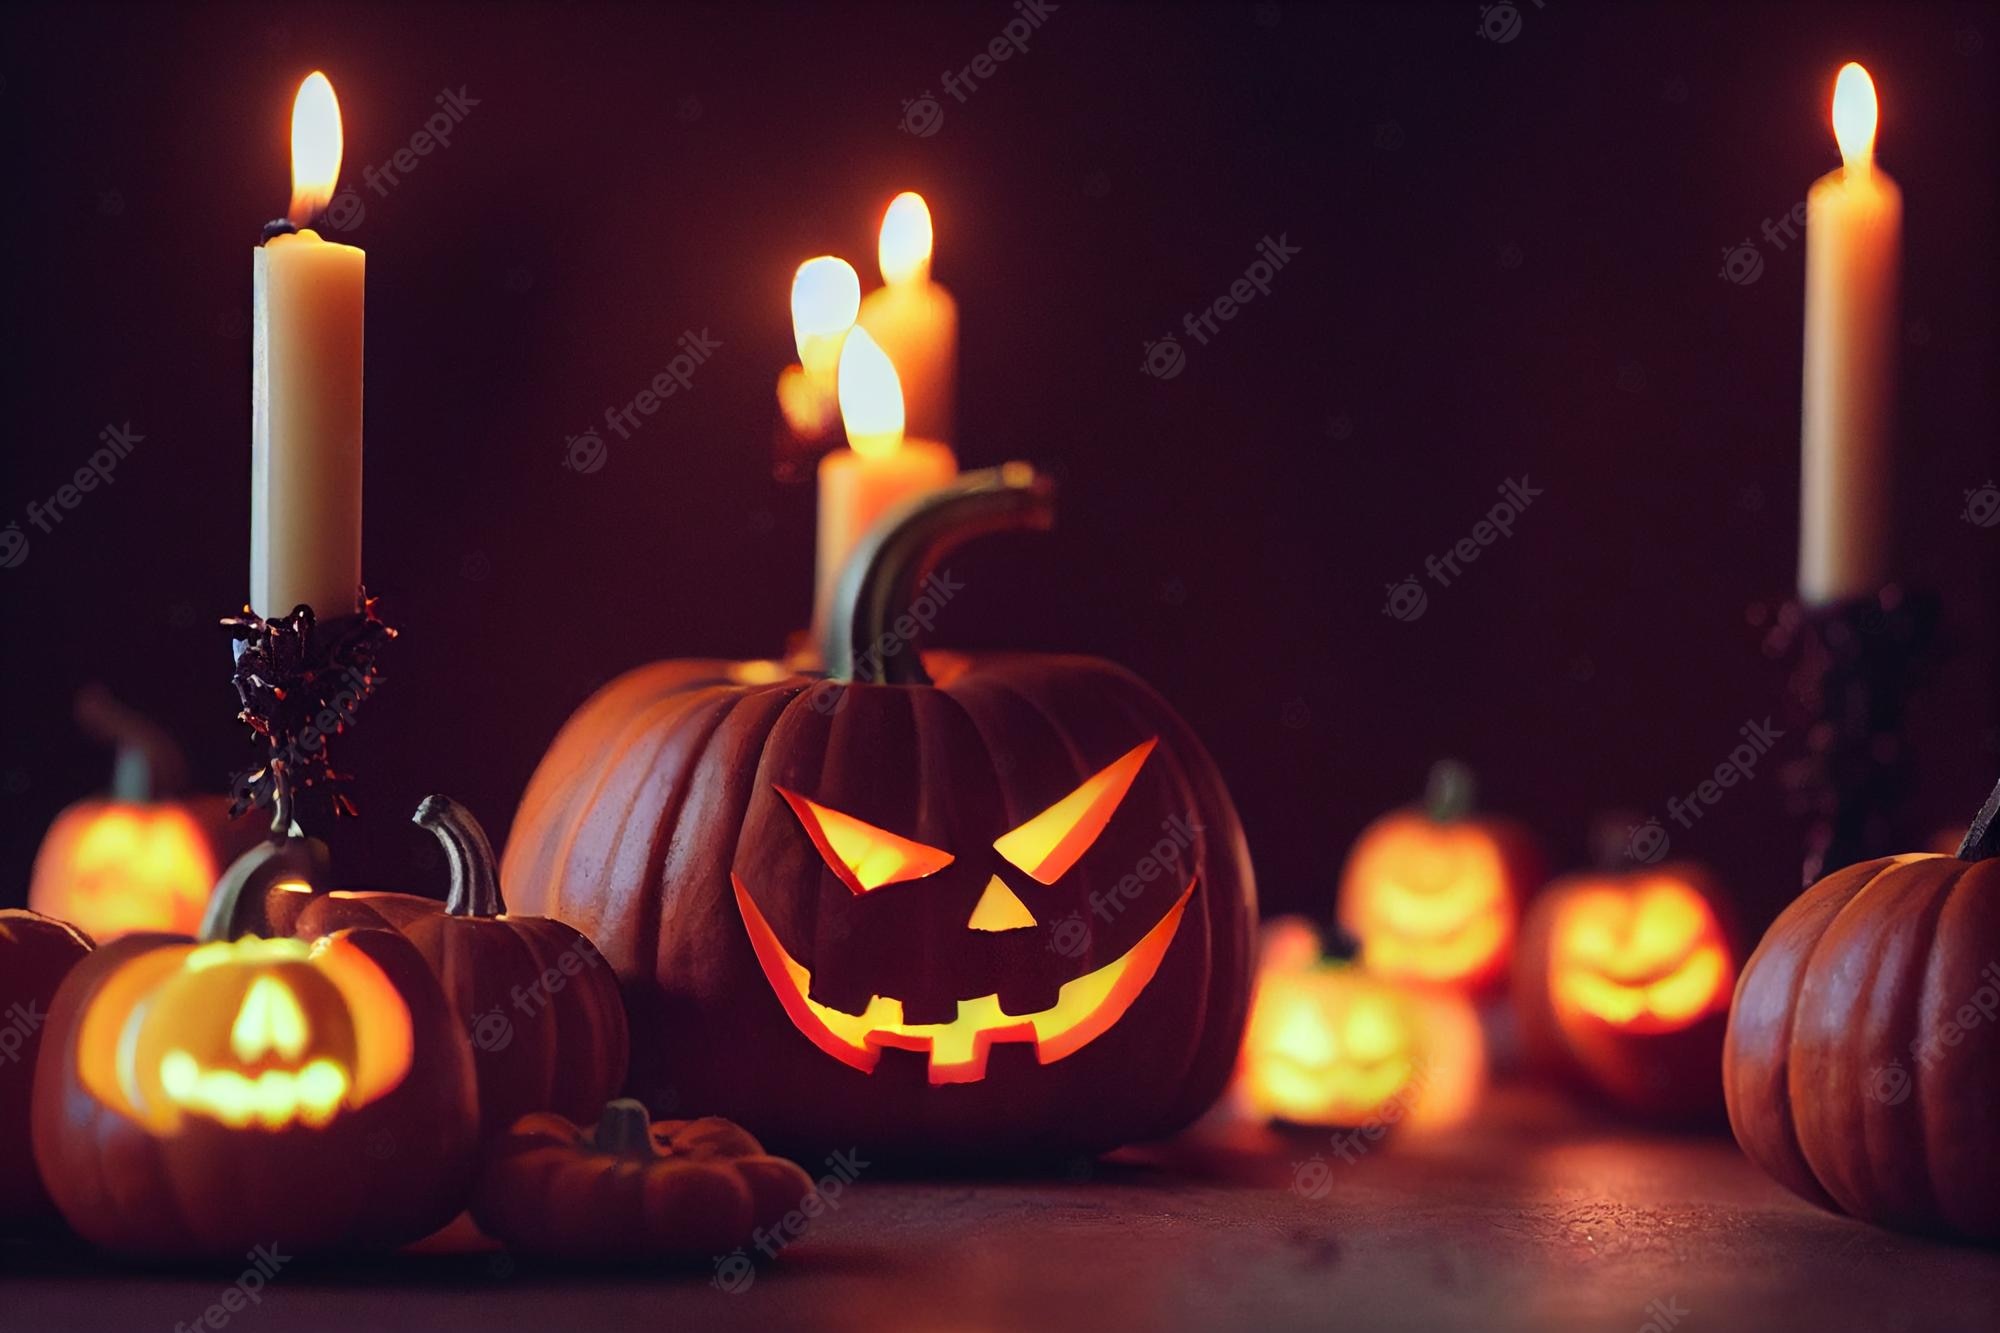 Premium Photo. Scary halloween pumpkin wallpaper over wooden plankswith candles and with scary tones for party nightclose up view of scary halloween pumpkin with eyes glowing inside at black background